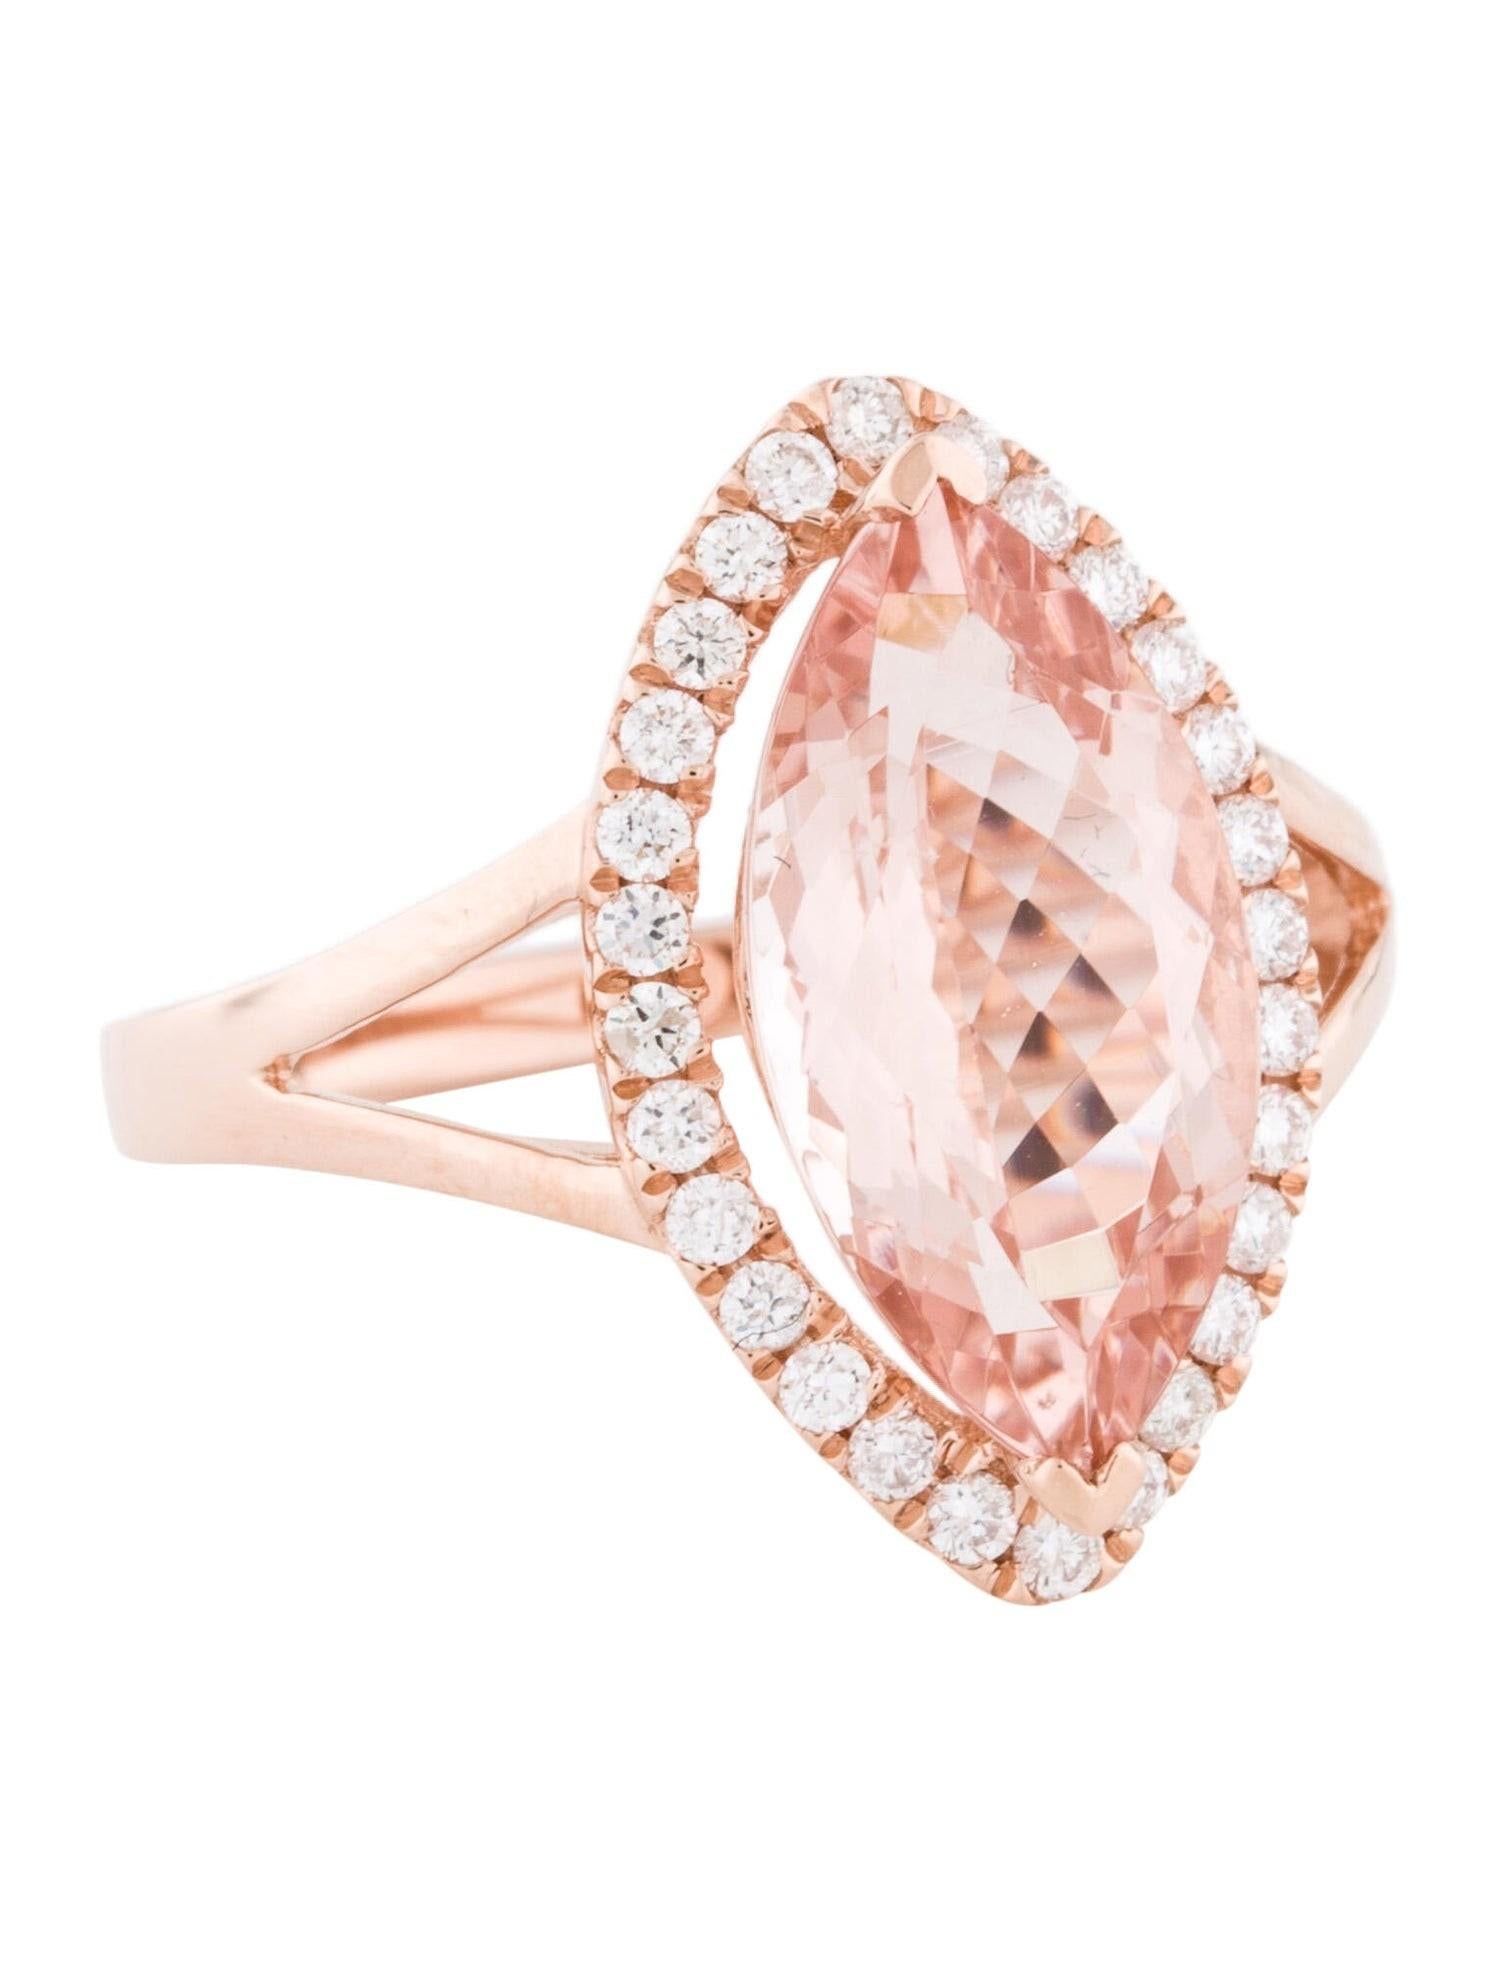 This is a stunning marquise-shaped natural morganite and diamond ring set in solid 14K rose gold. This ring features a natural marquise shaped 3.50 Carat morganite stone with excellent color (AAA quality gem) that is surrounded by a band of